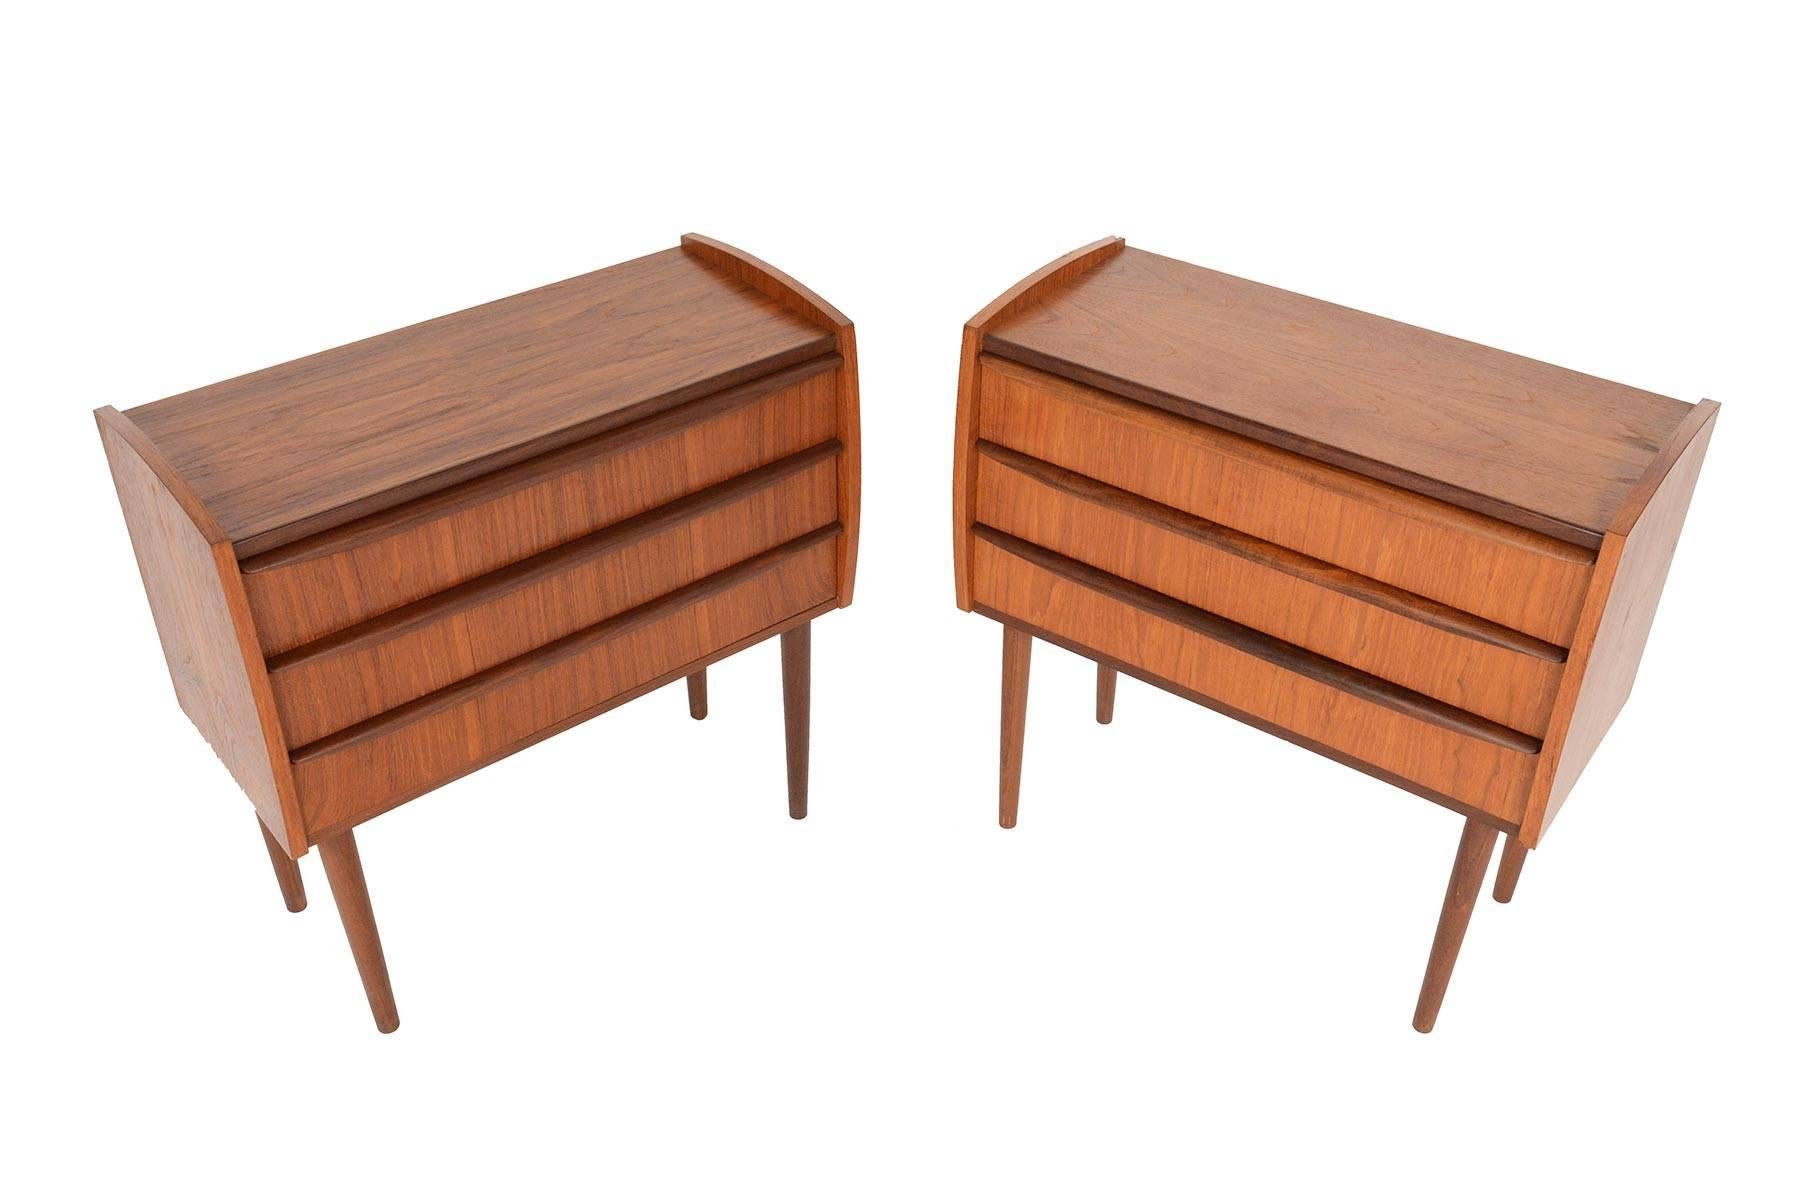 This pair of Danish modern bow edge midcentury teak nightstands will make a wonderful addition to any modern home. Three well sized drawers are complimented by full profile, hand carved rolled teak drawer pulls. In excellent original condition with